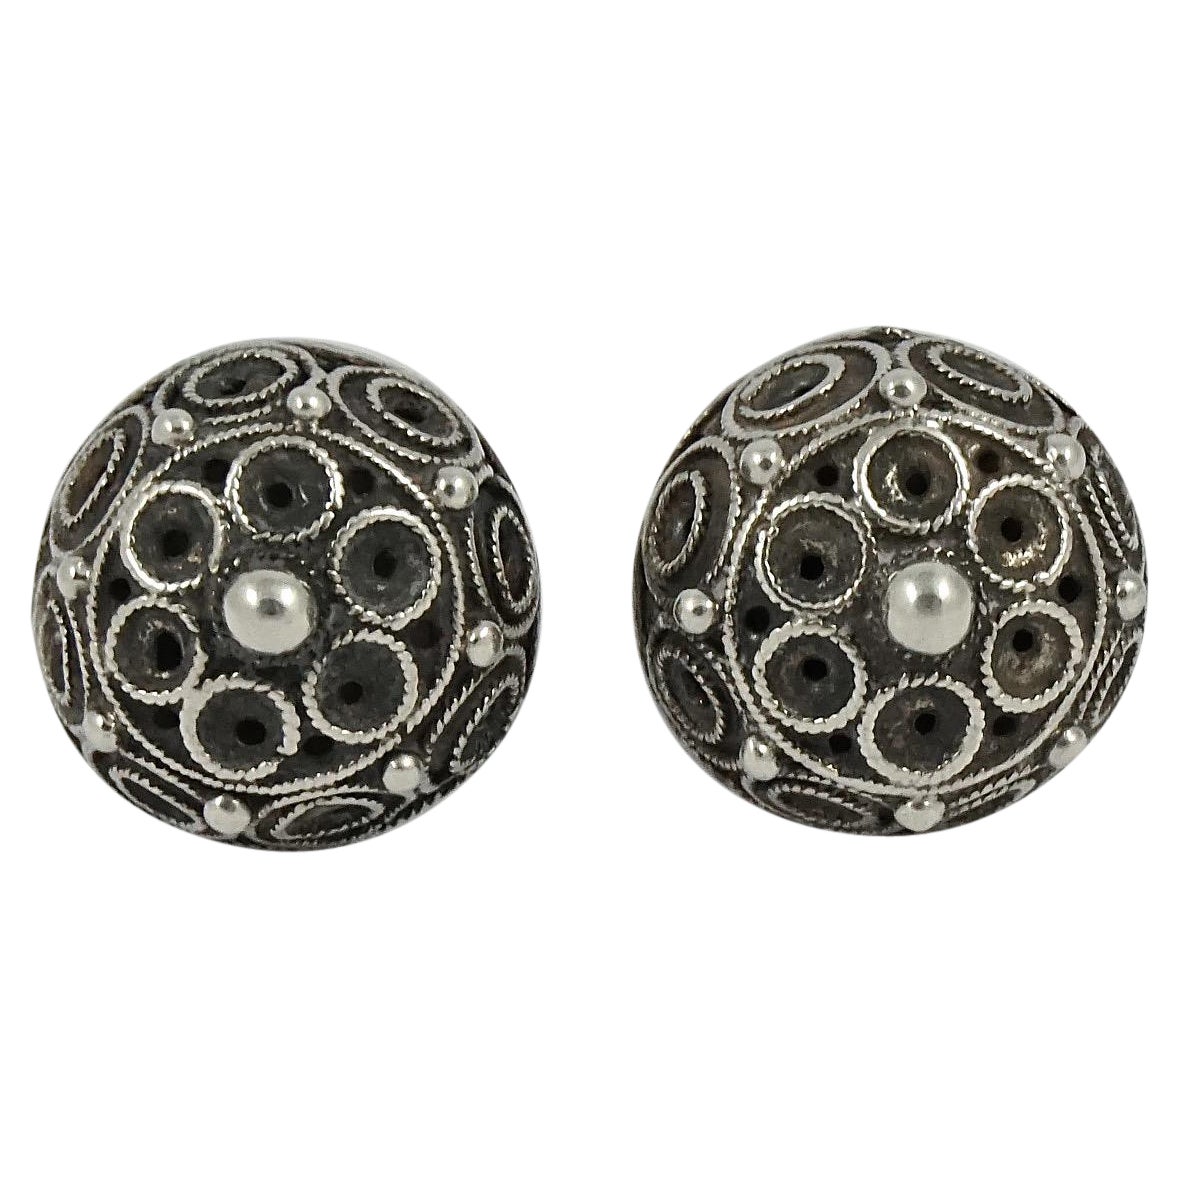 Antique Victorian Silver Etruscan Revival Dome Earrings